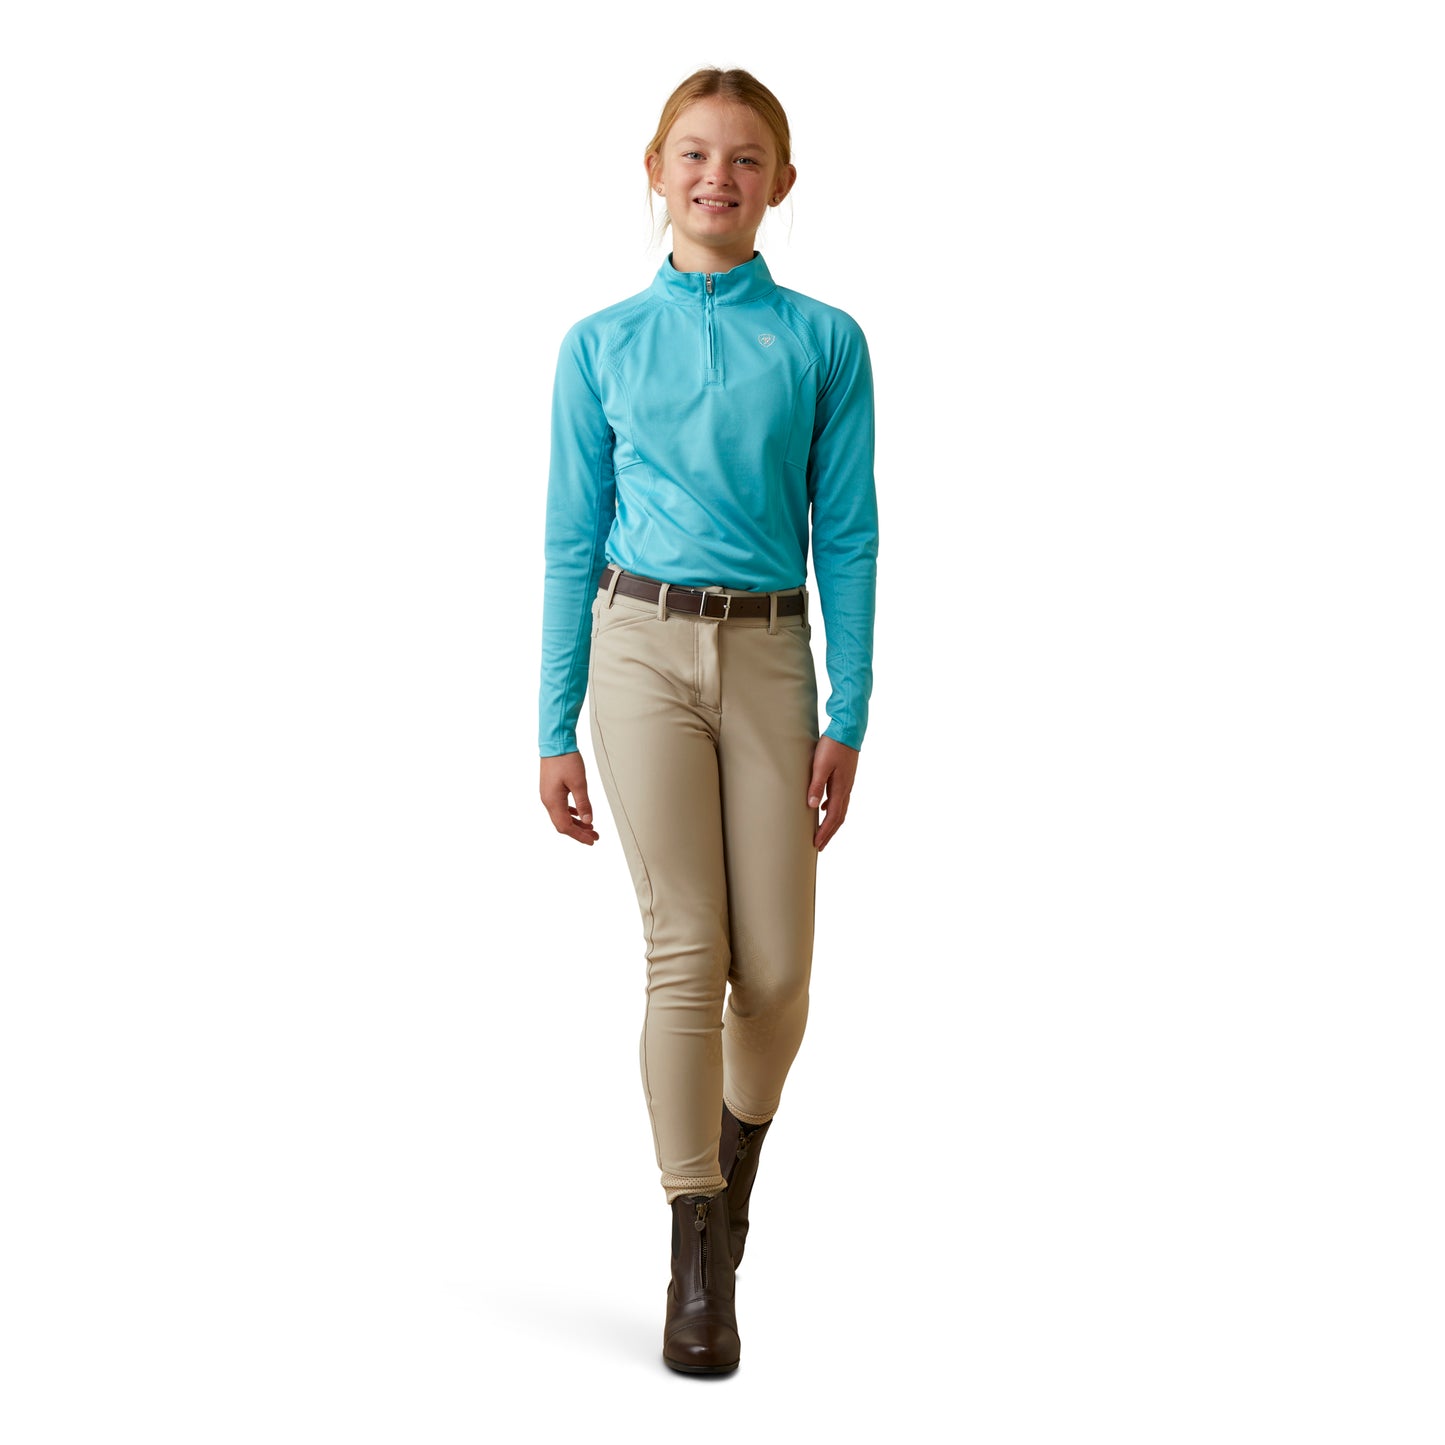 Load image into Gallery viewer, Ariat® Youth Girls Sunstopper 2.0 Maui Blue 1/4 Zip Baselayer 10043604
